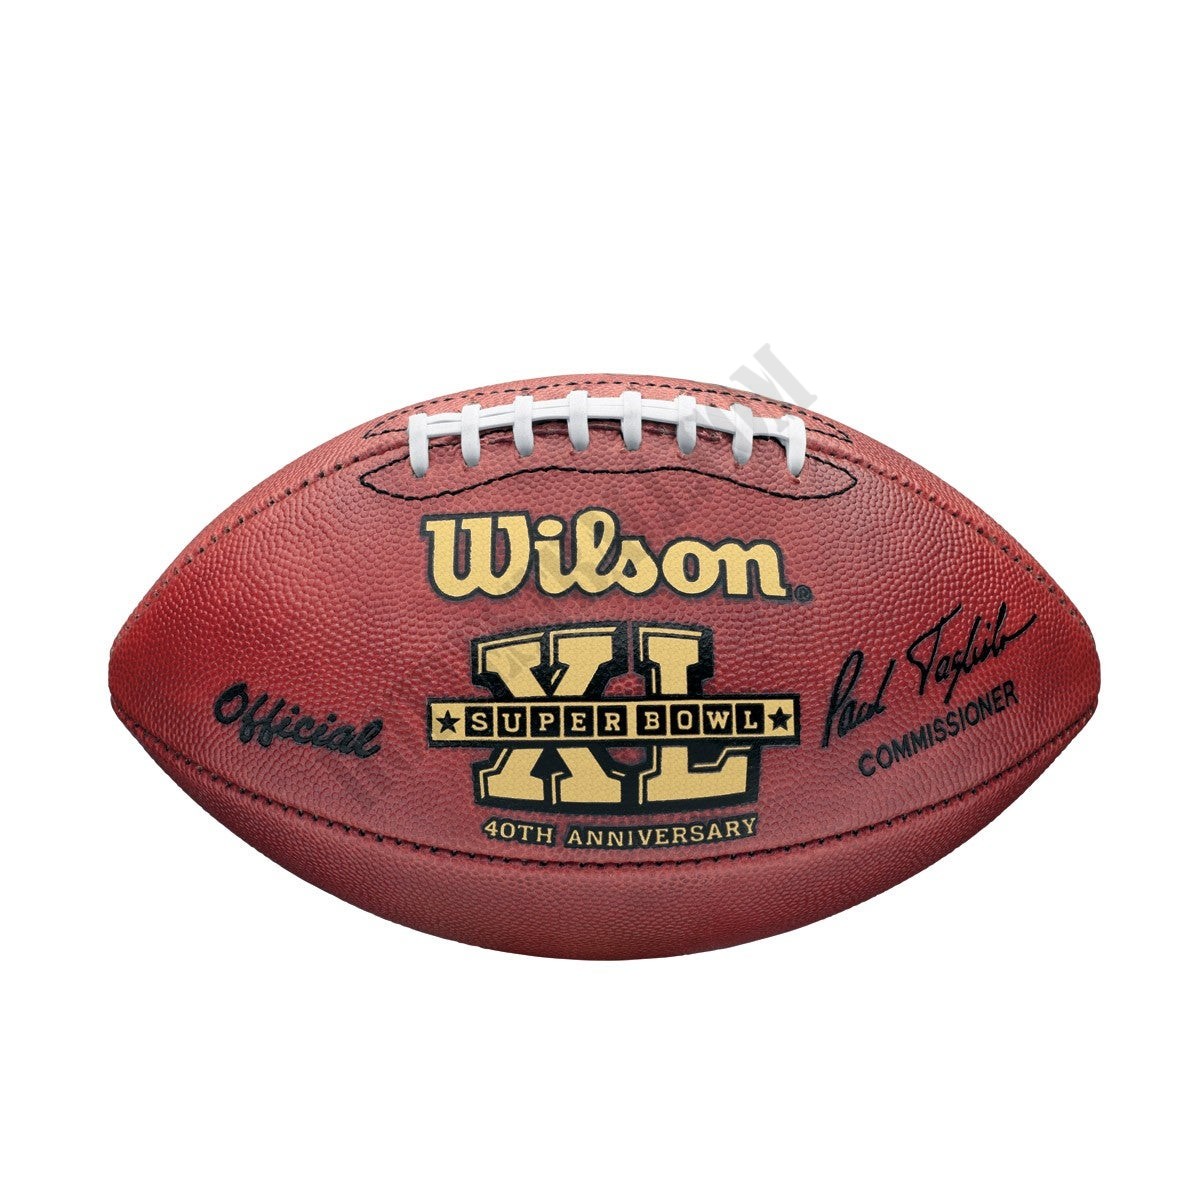 Super Bowl XL Game Football - Pittsburgh Steelers ● Wilson Promotions - -0